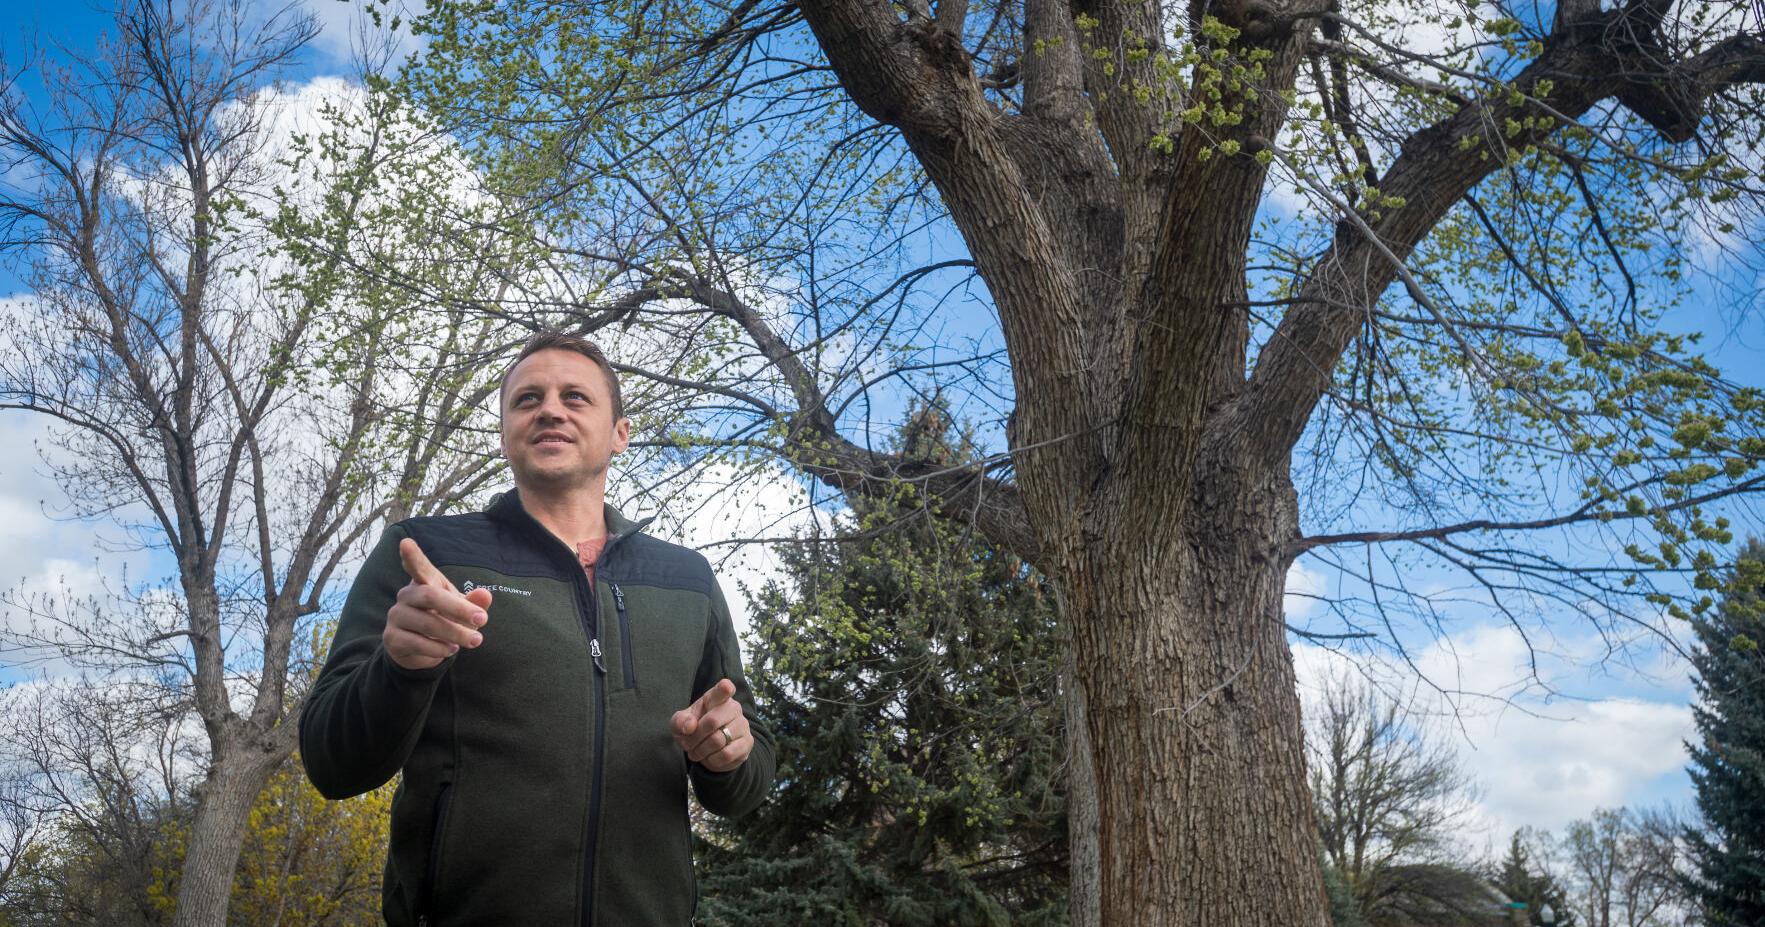 The future of the urban forest: Parks Superintendent speaks for the trees